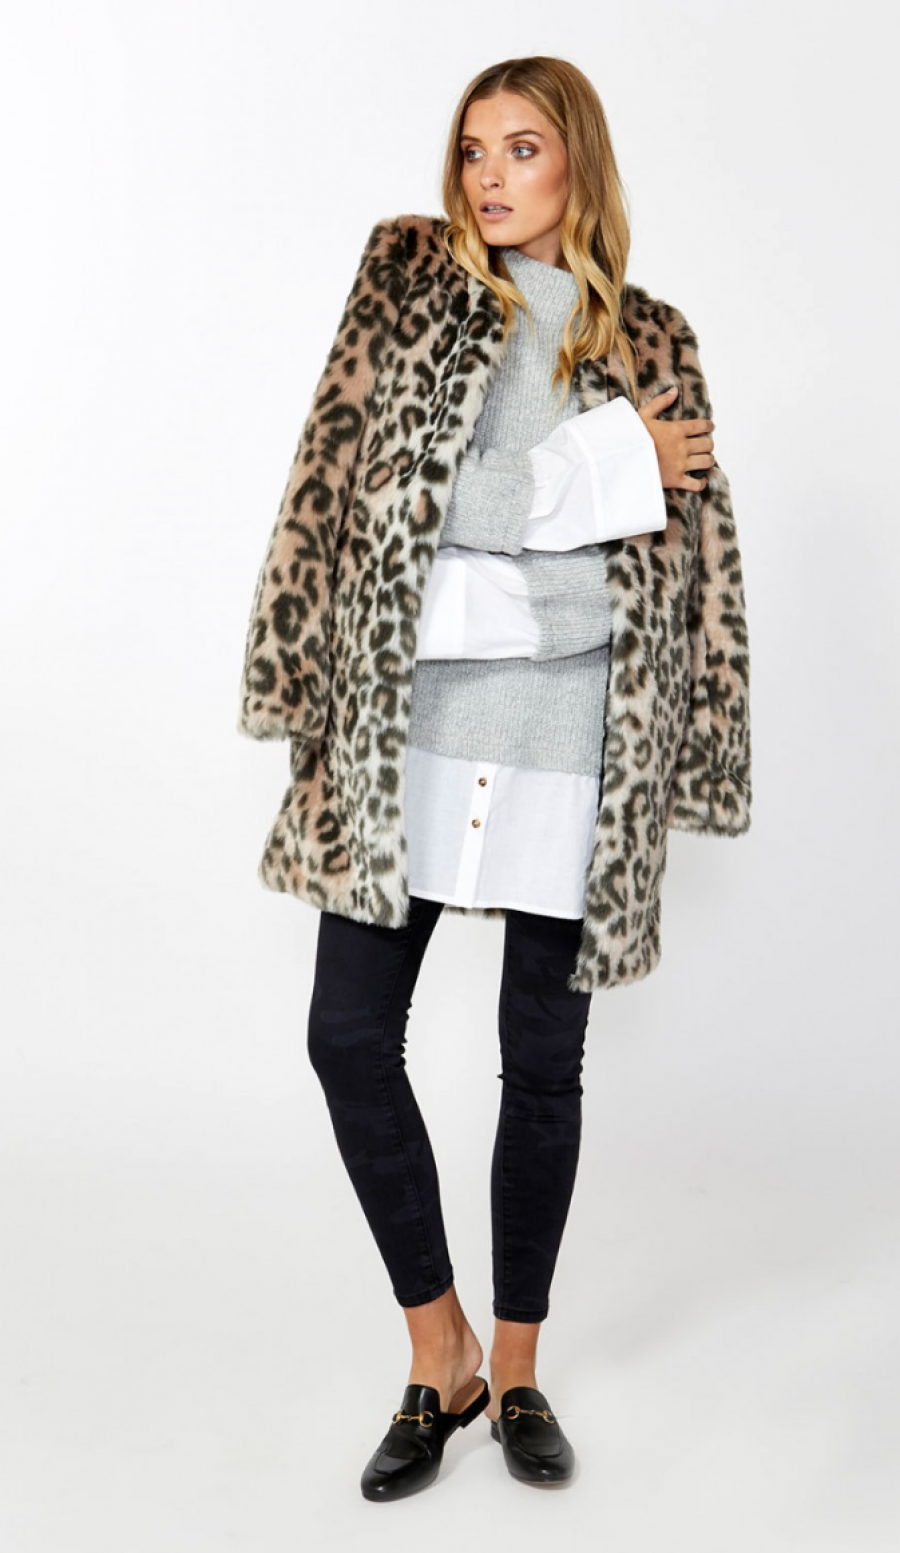 See Need Want Mothers Day Gift Guide Decjuba Leopard Print Coat 1